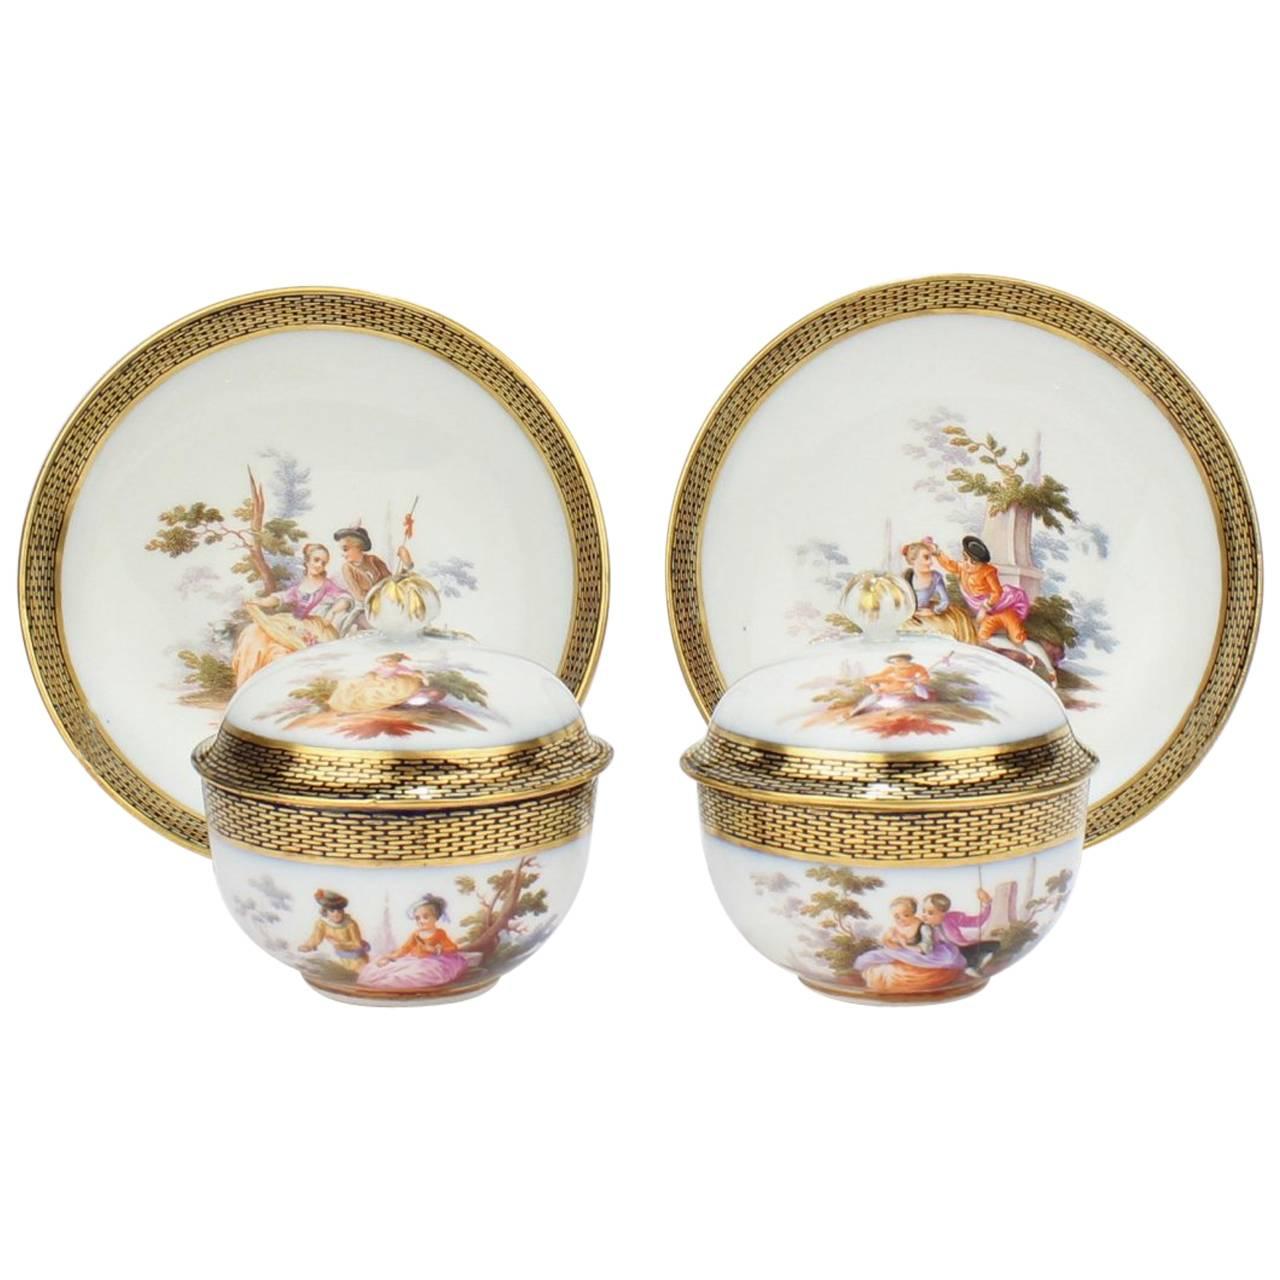 Pair of Antique Meissen Porcelain Covered Tea Cups and Saucers, 19th Century